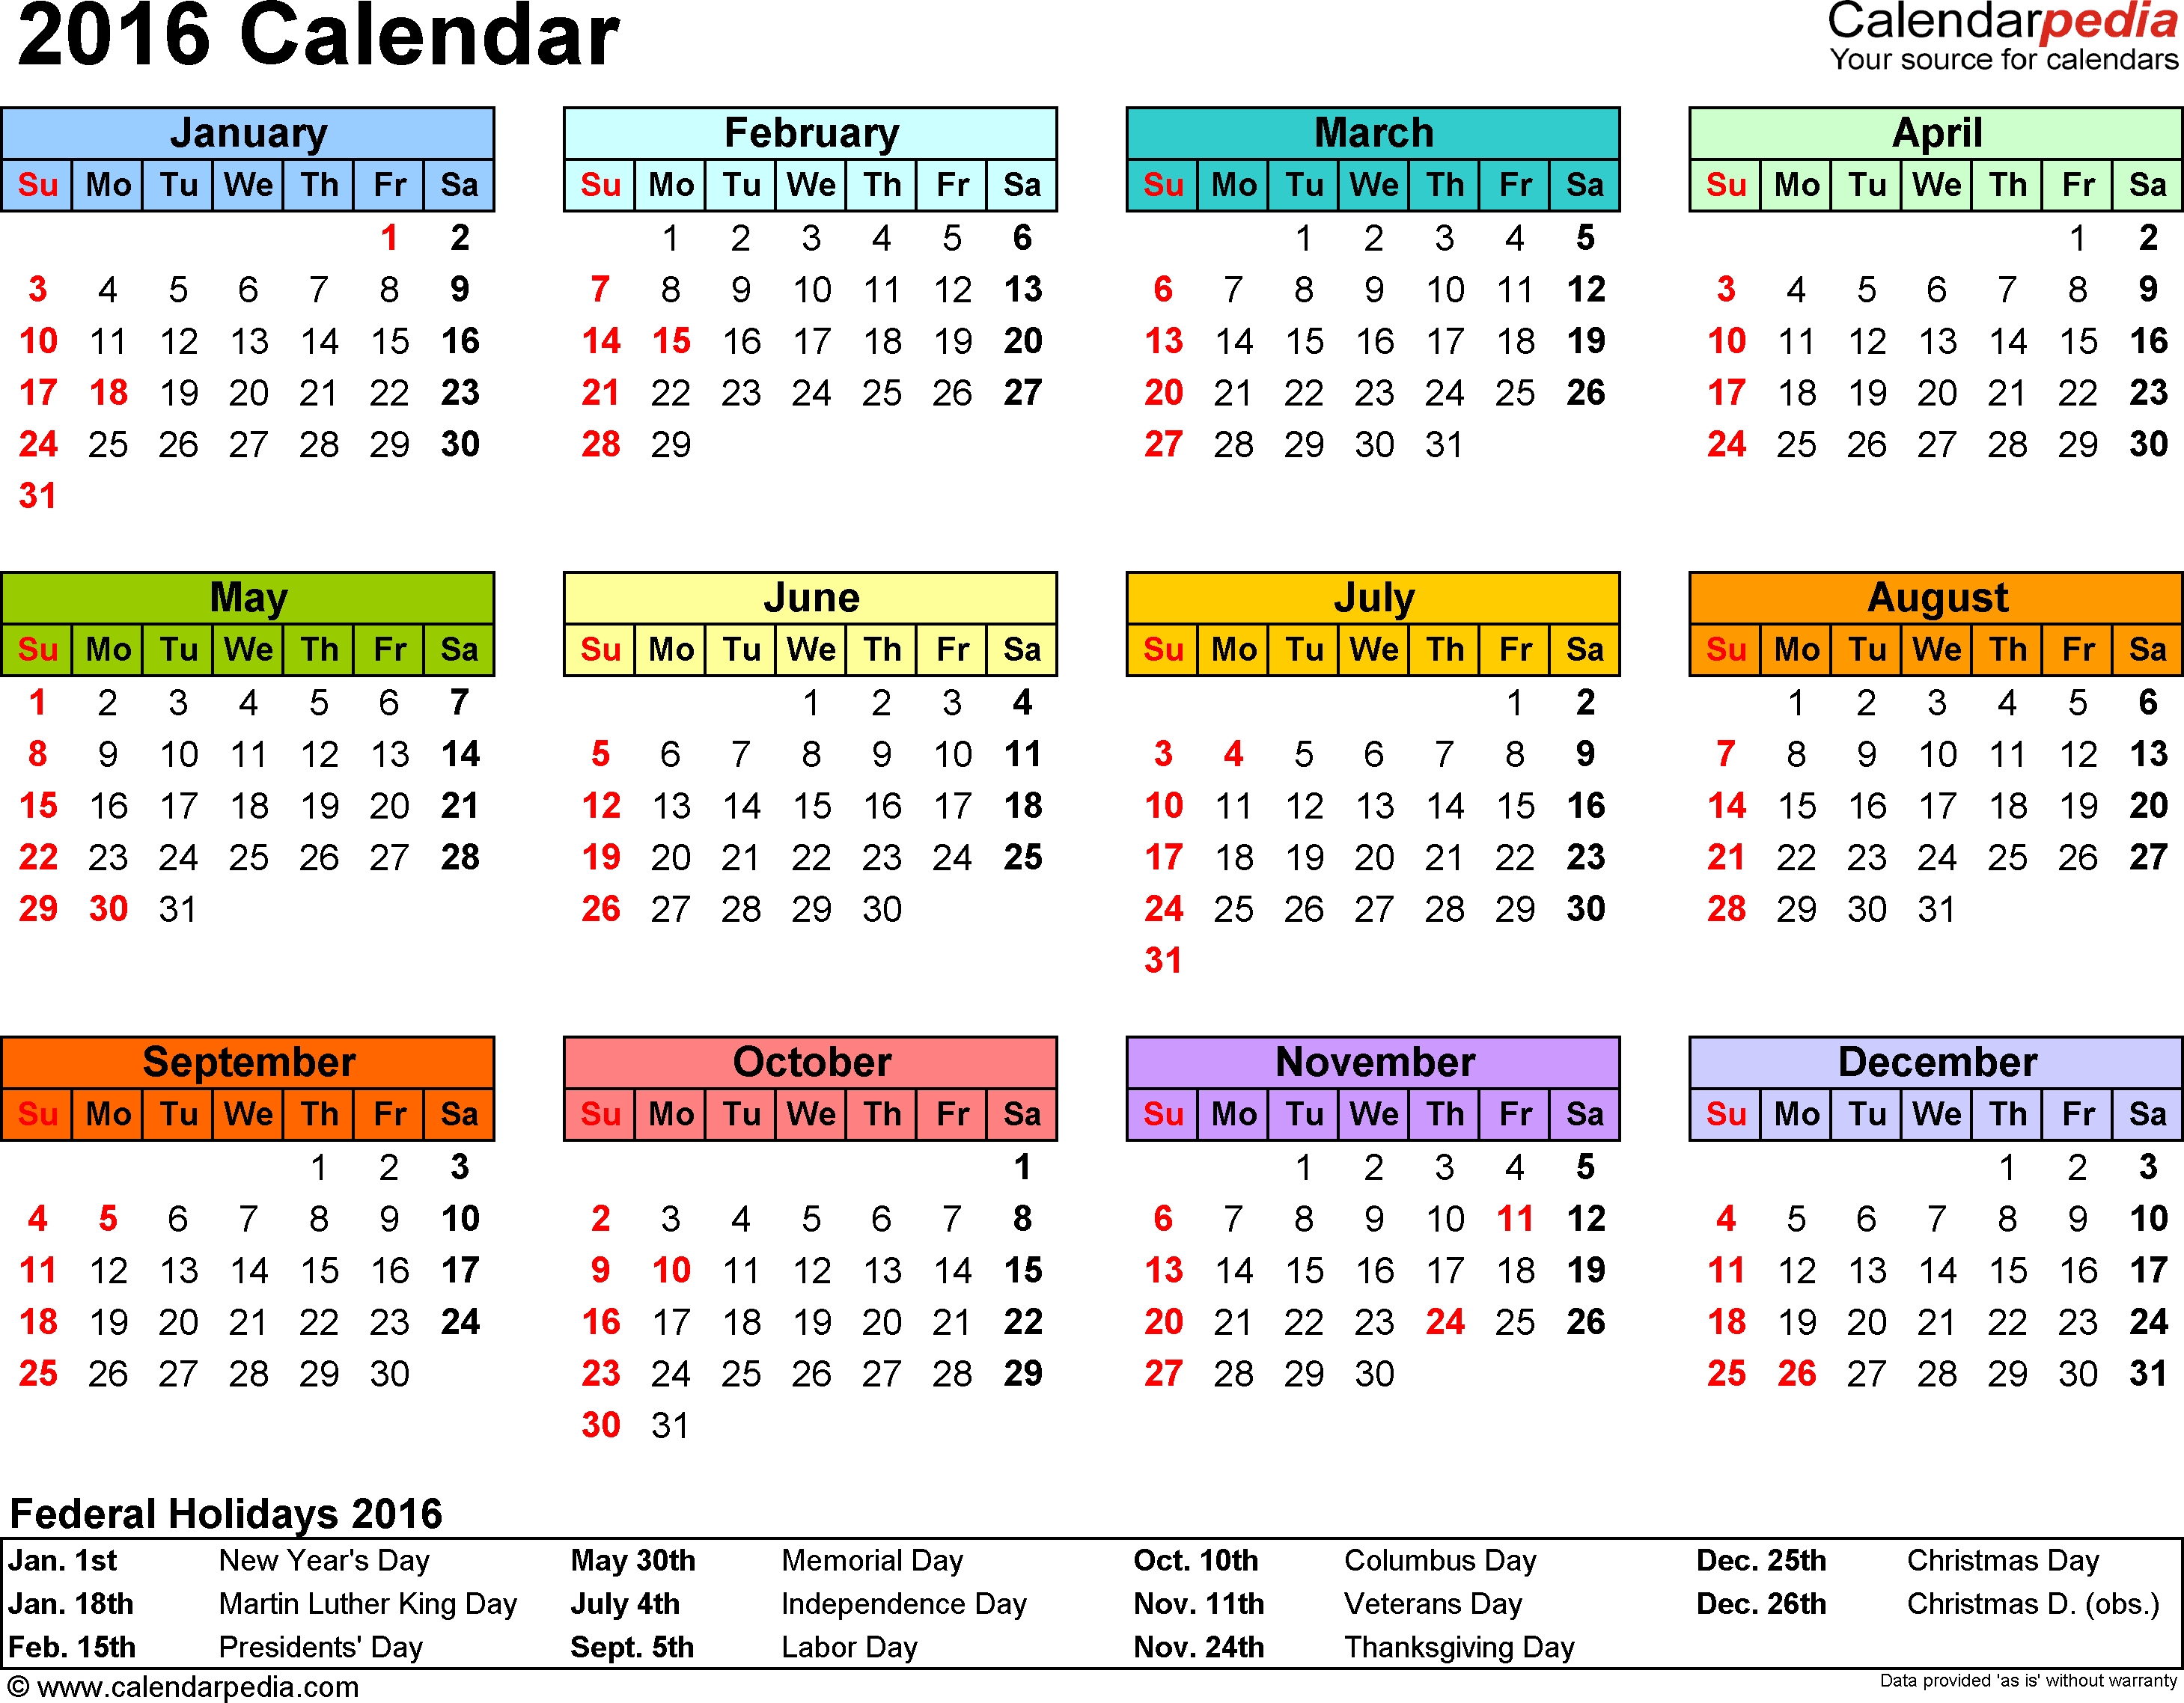 Template 7: 2016 Calendar For Pdf, Year At A Glance, 1 Page, In intended for Year At A Glance Calendar Template